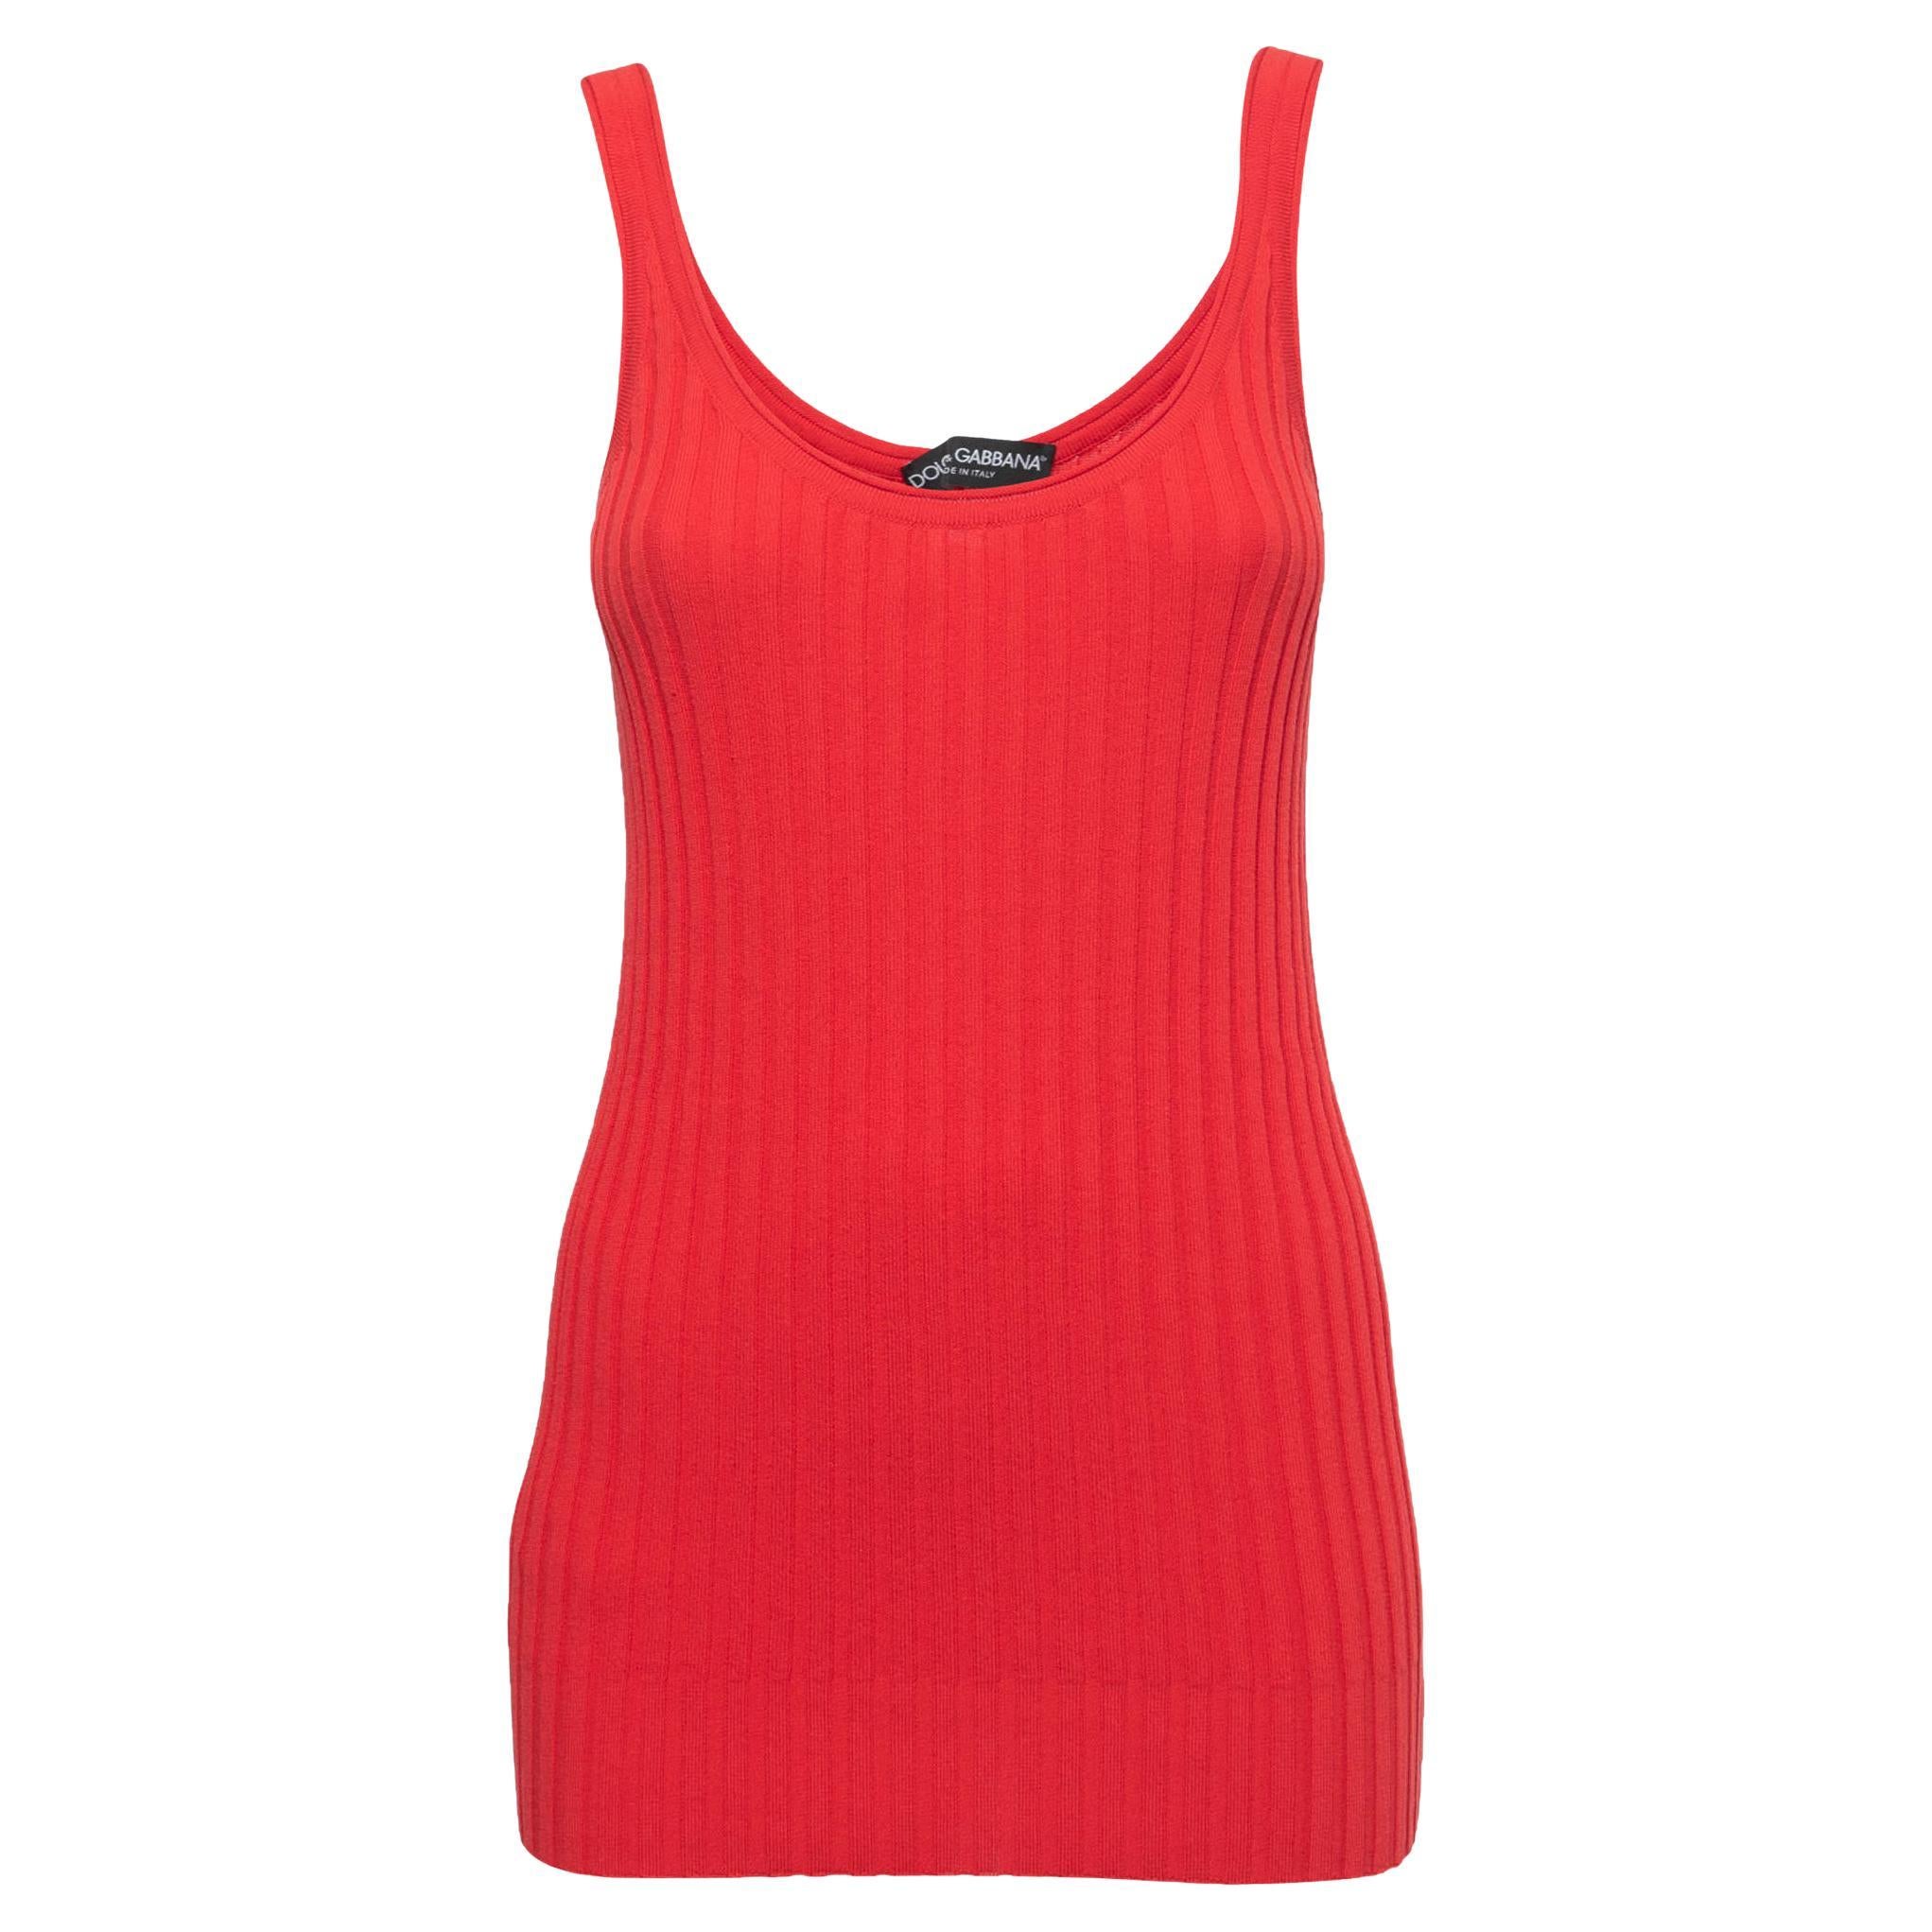 Dolce & Gabbana Red Cotton Rib Knit Tank Top M For Sale